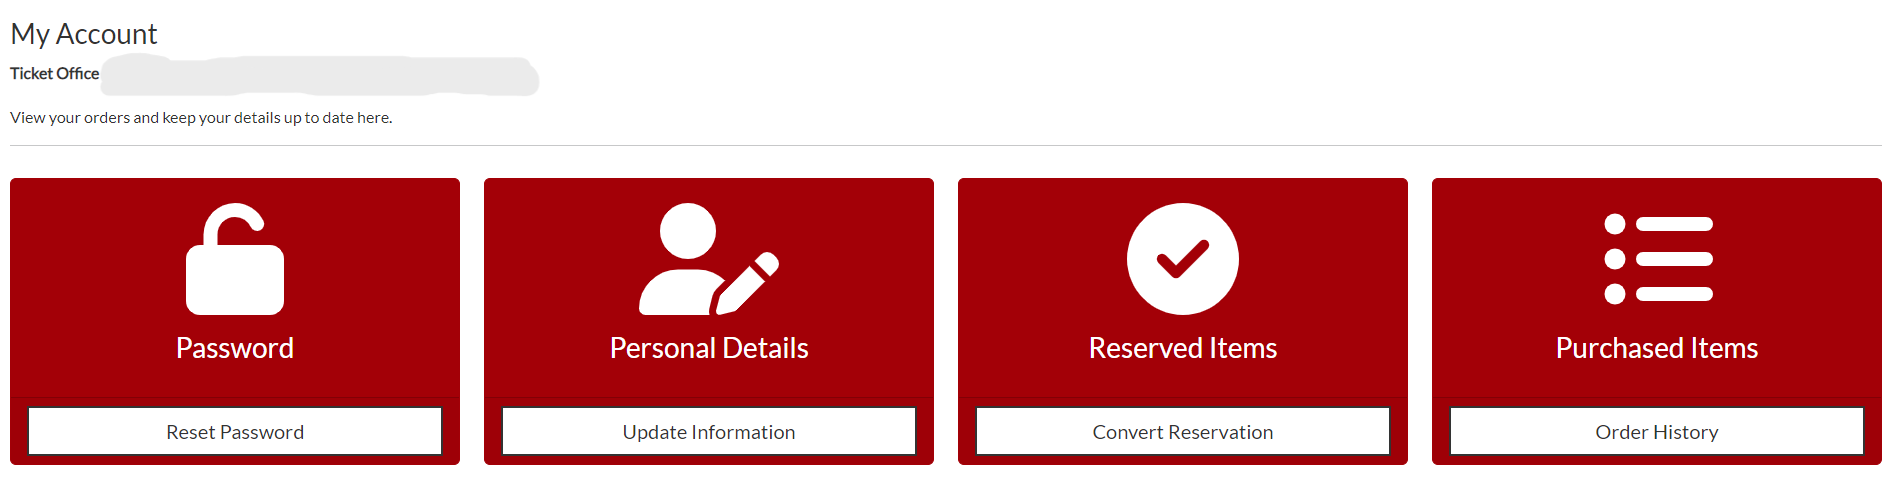 Select ‘Convert Reservation’ under the Reserved Items option.